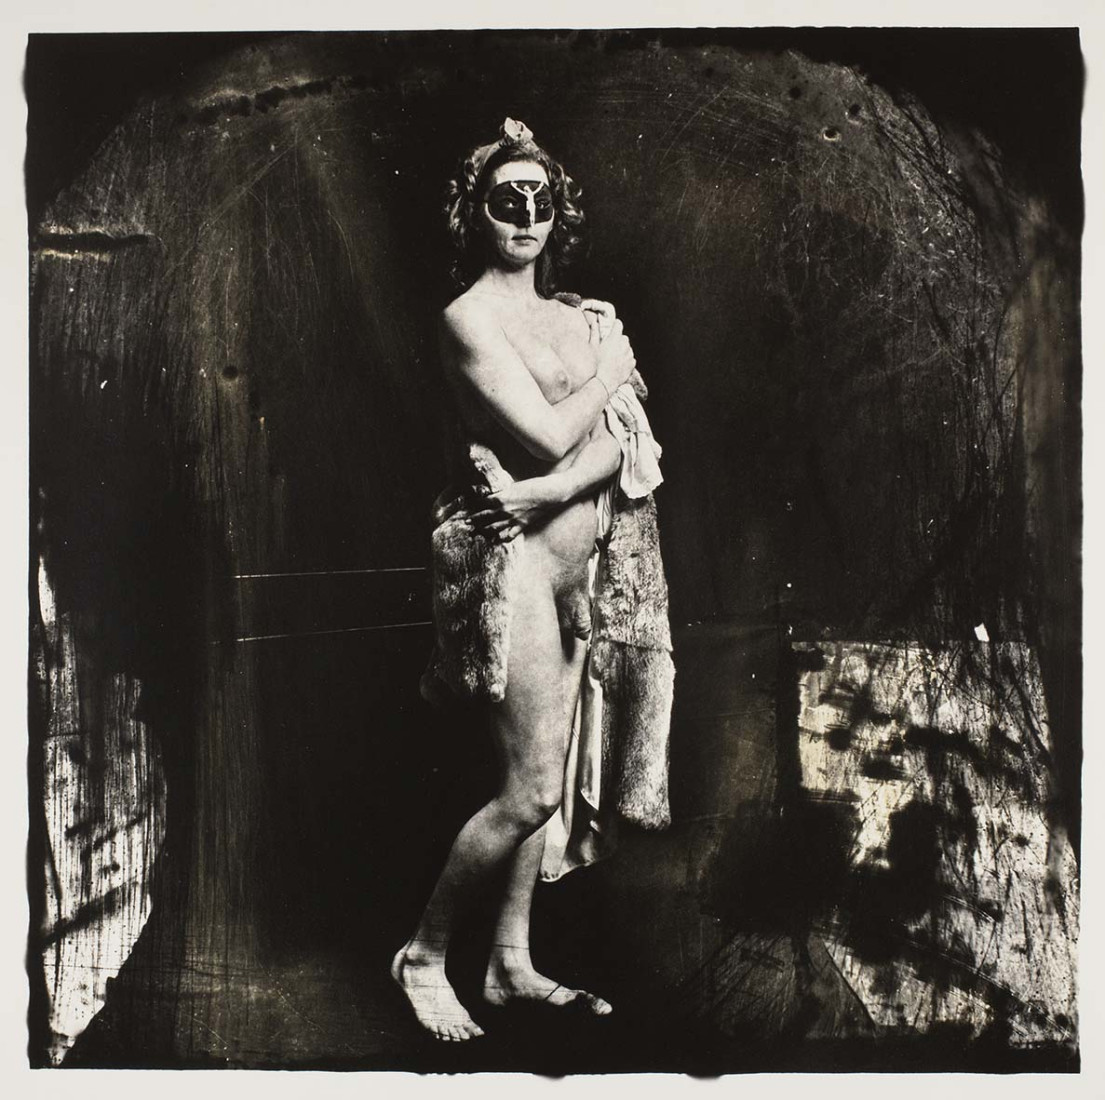 Joel-Peter Witkin "Journeys of the Mask, Helena Fourment", 1984